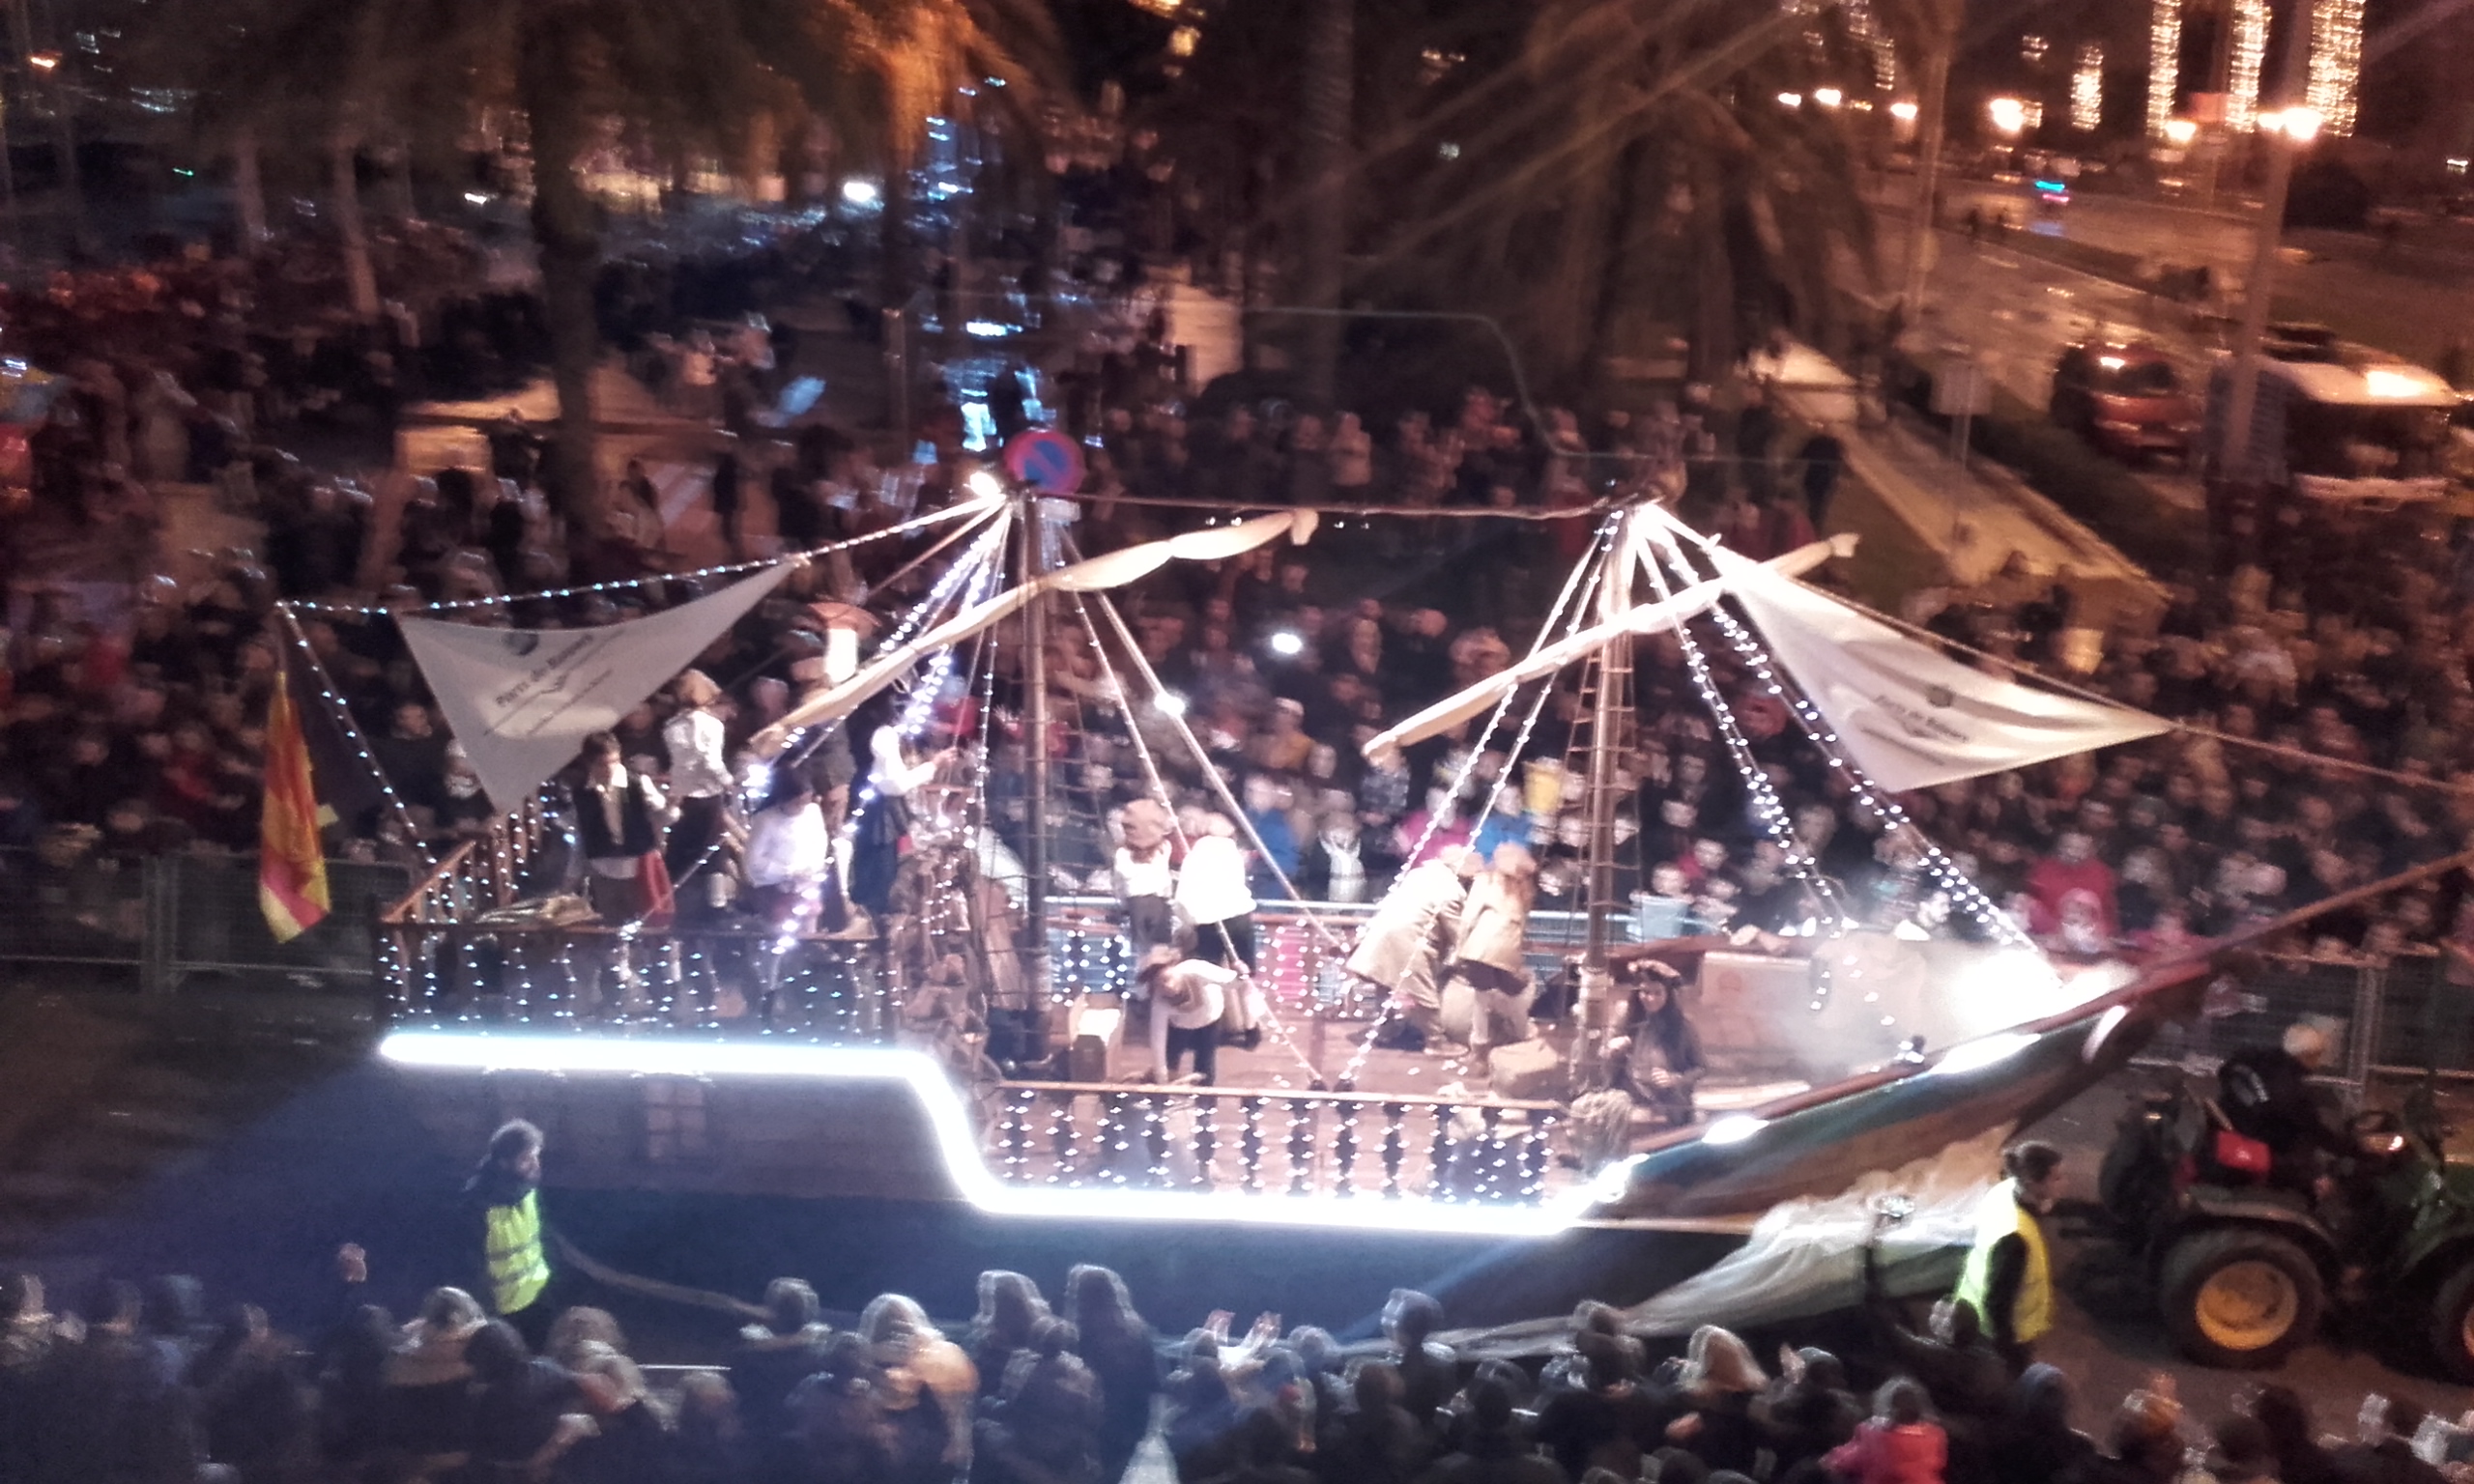 The APB takes part in Ibiza's Three Kings Parade with a large sailing boat